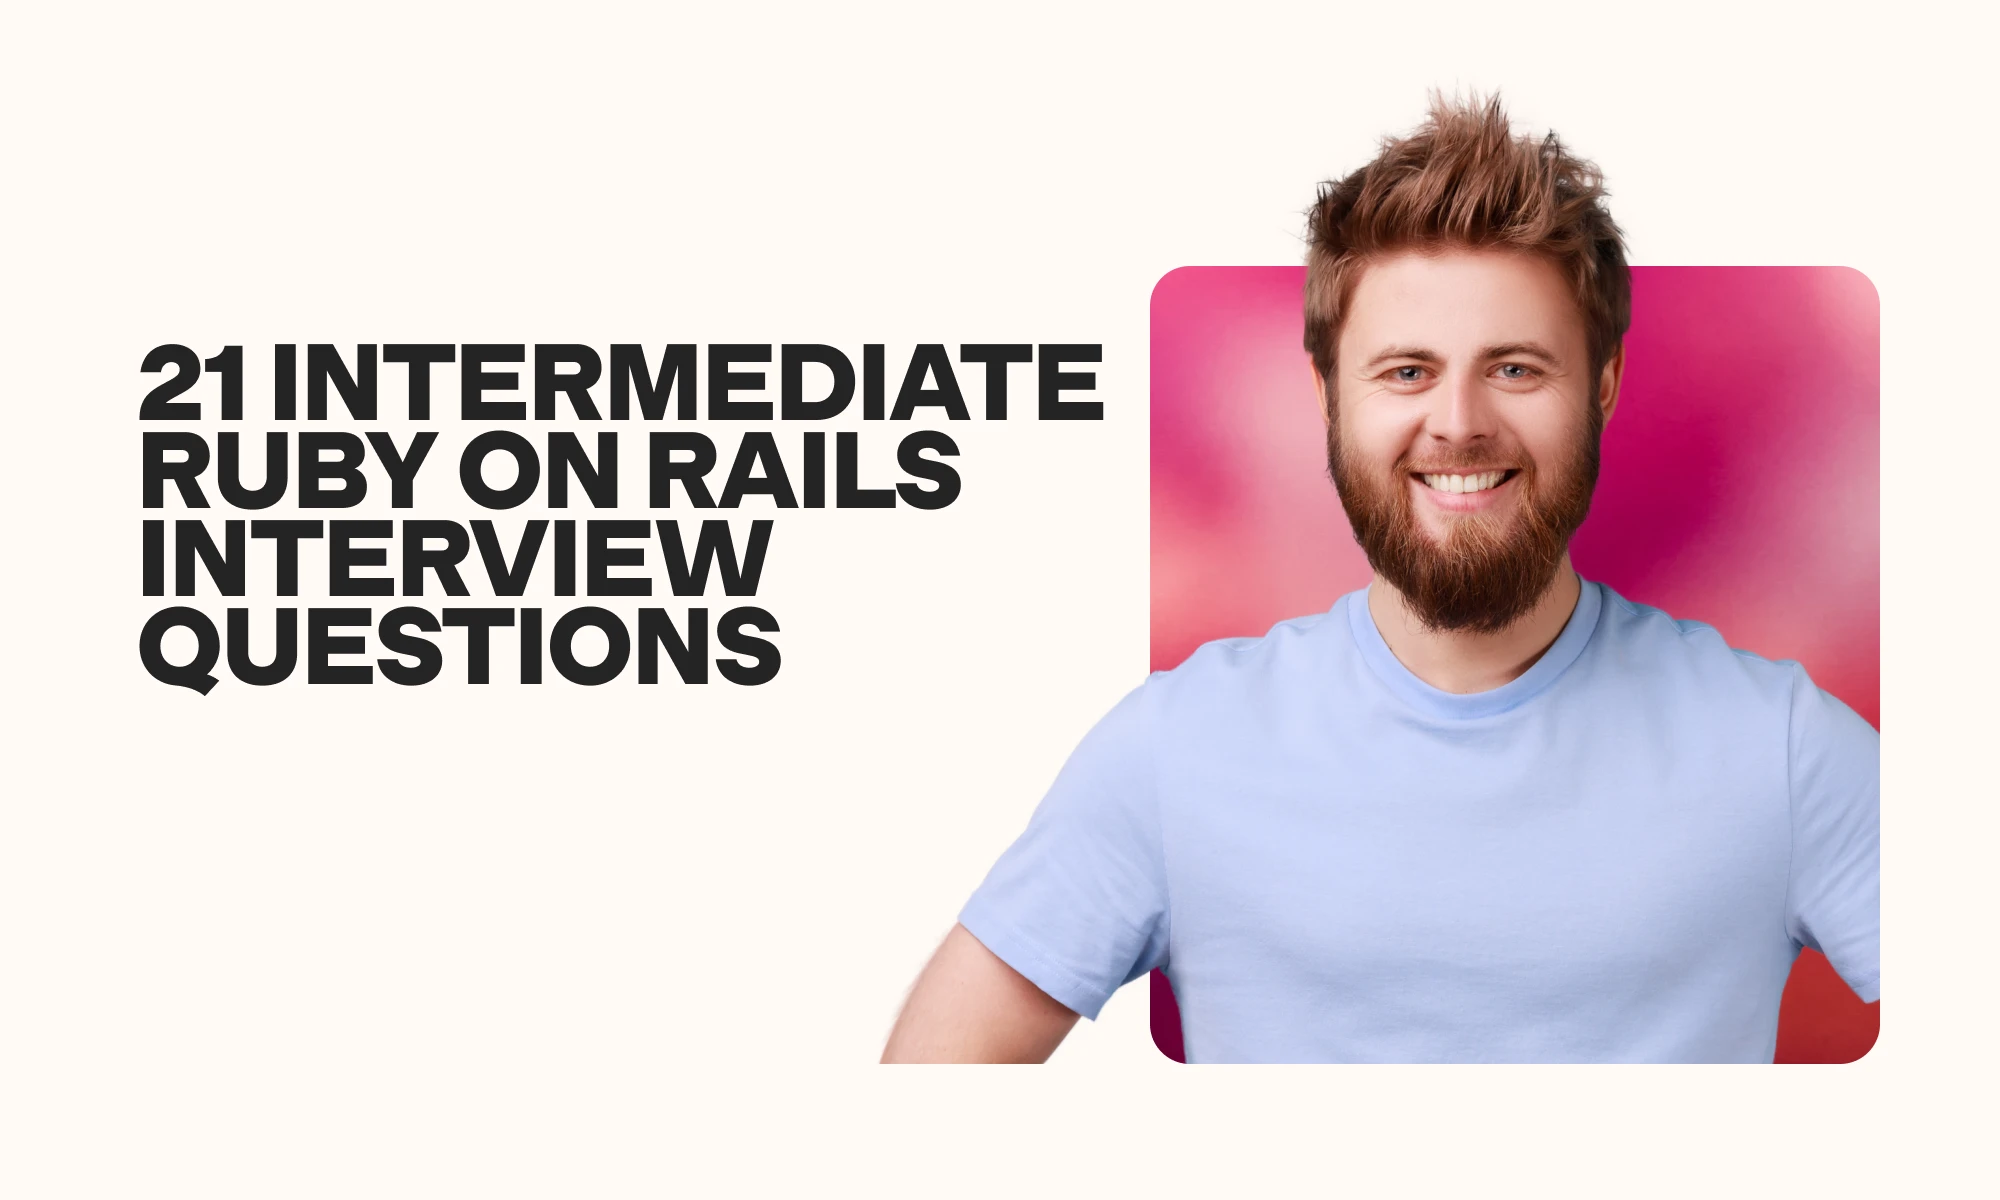 image showing intermediate Ruby on Rails interview questions